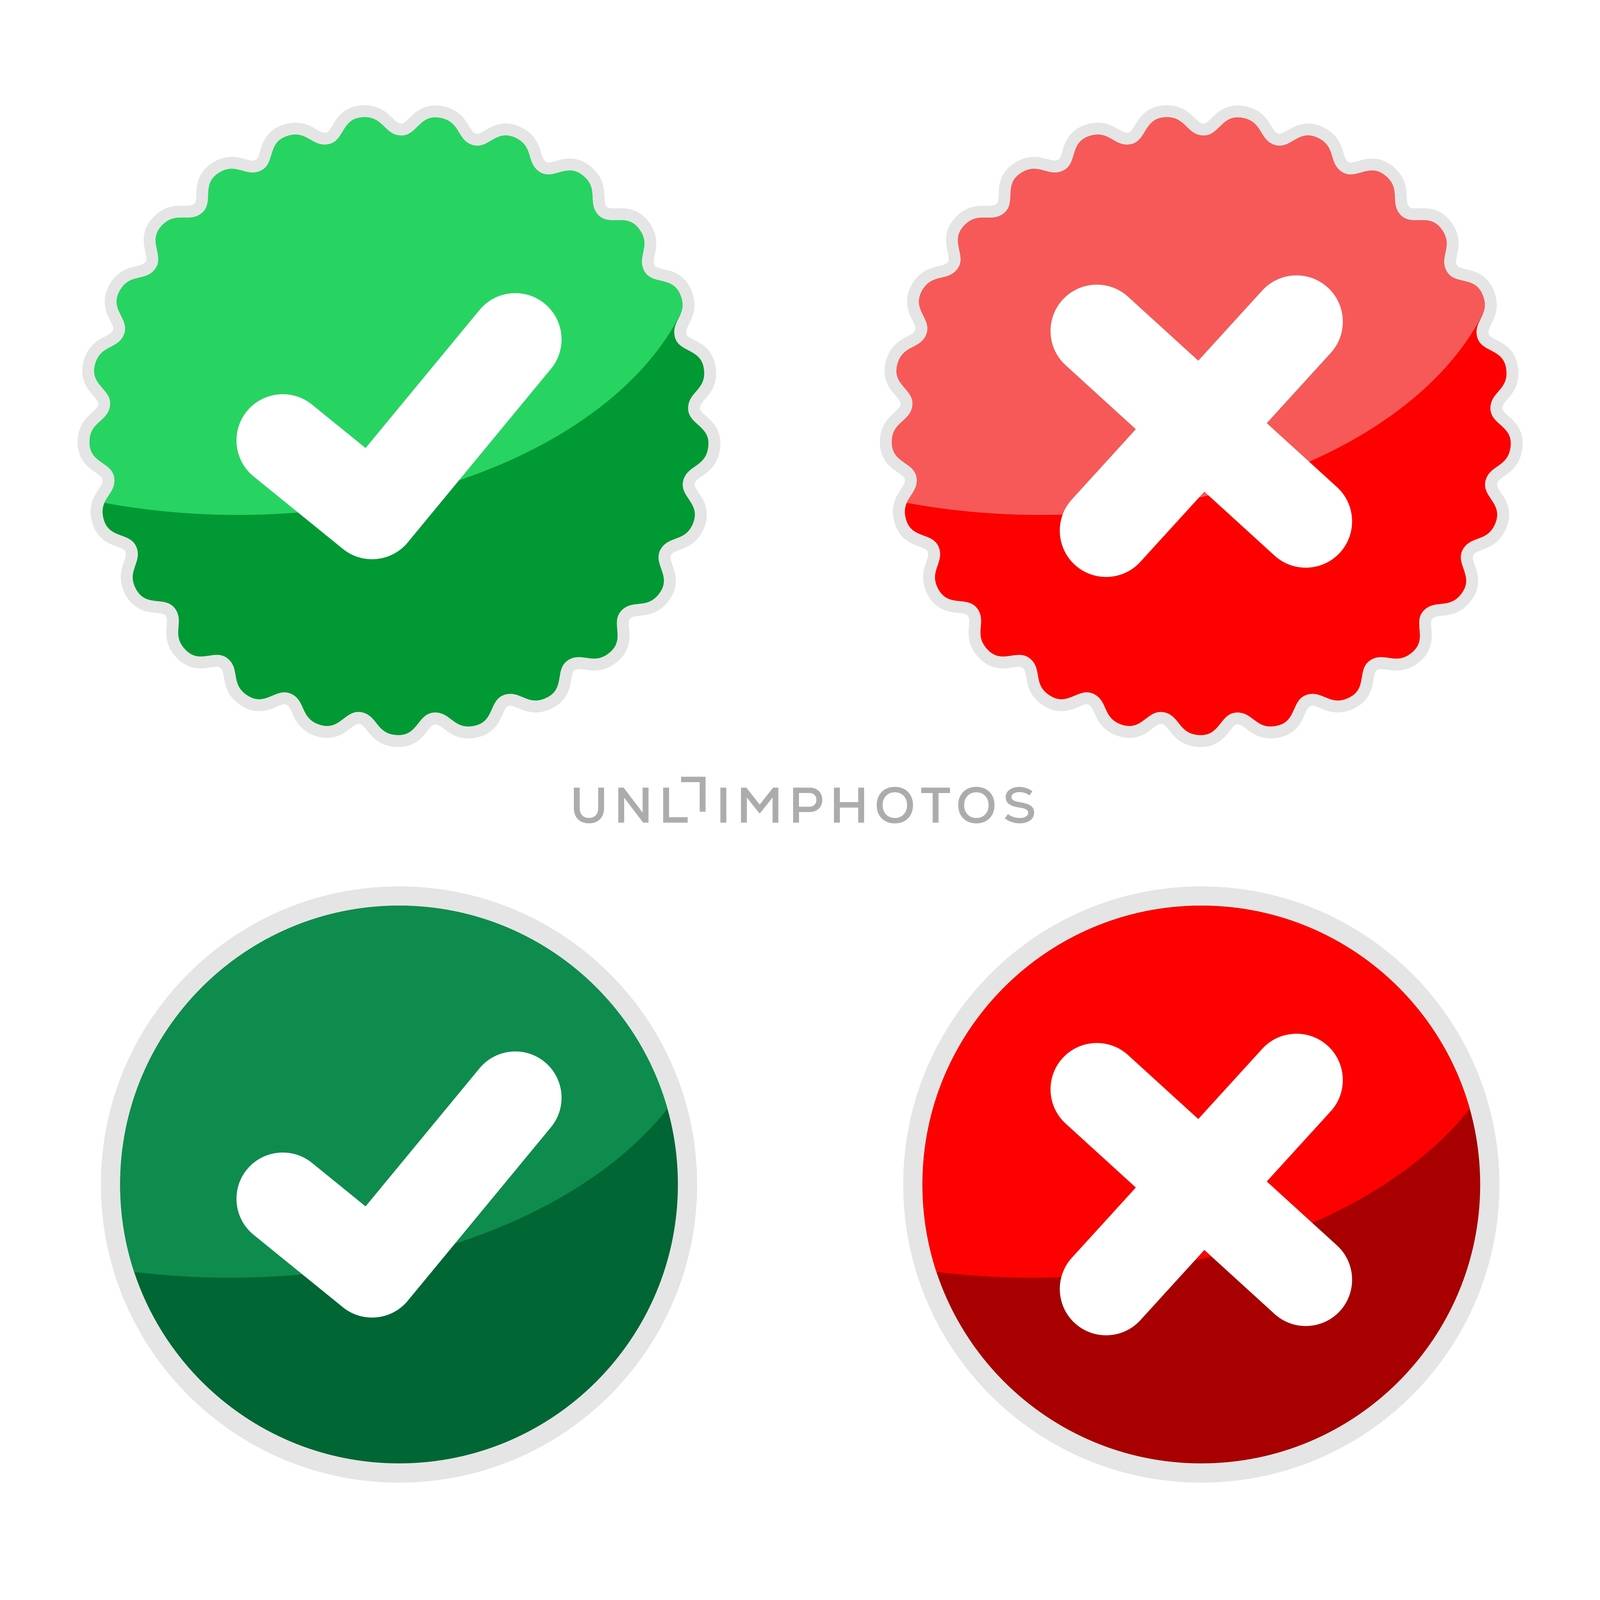 Check Mark and Cross, True and Wrong, Approved and Denial Illustration Design. Vector EPS 10. by soponyono1